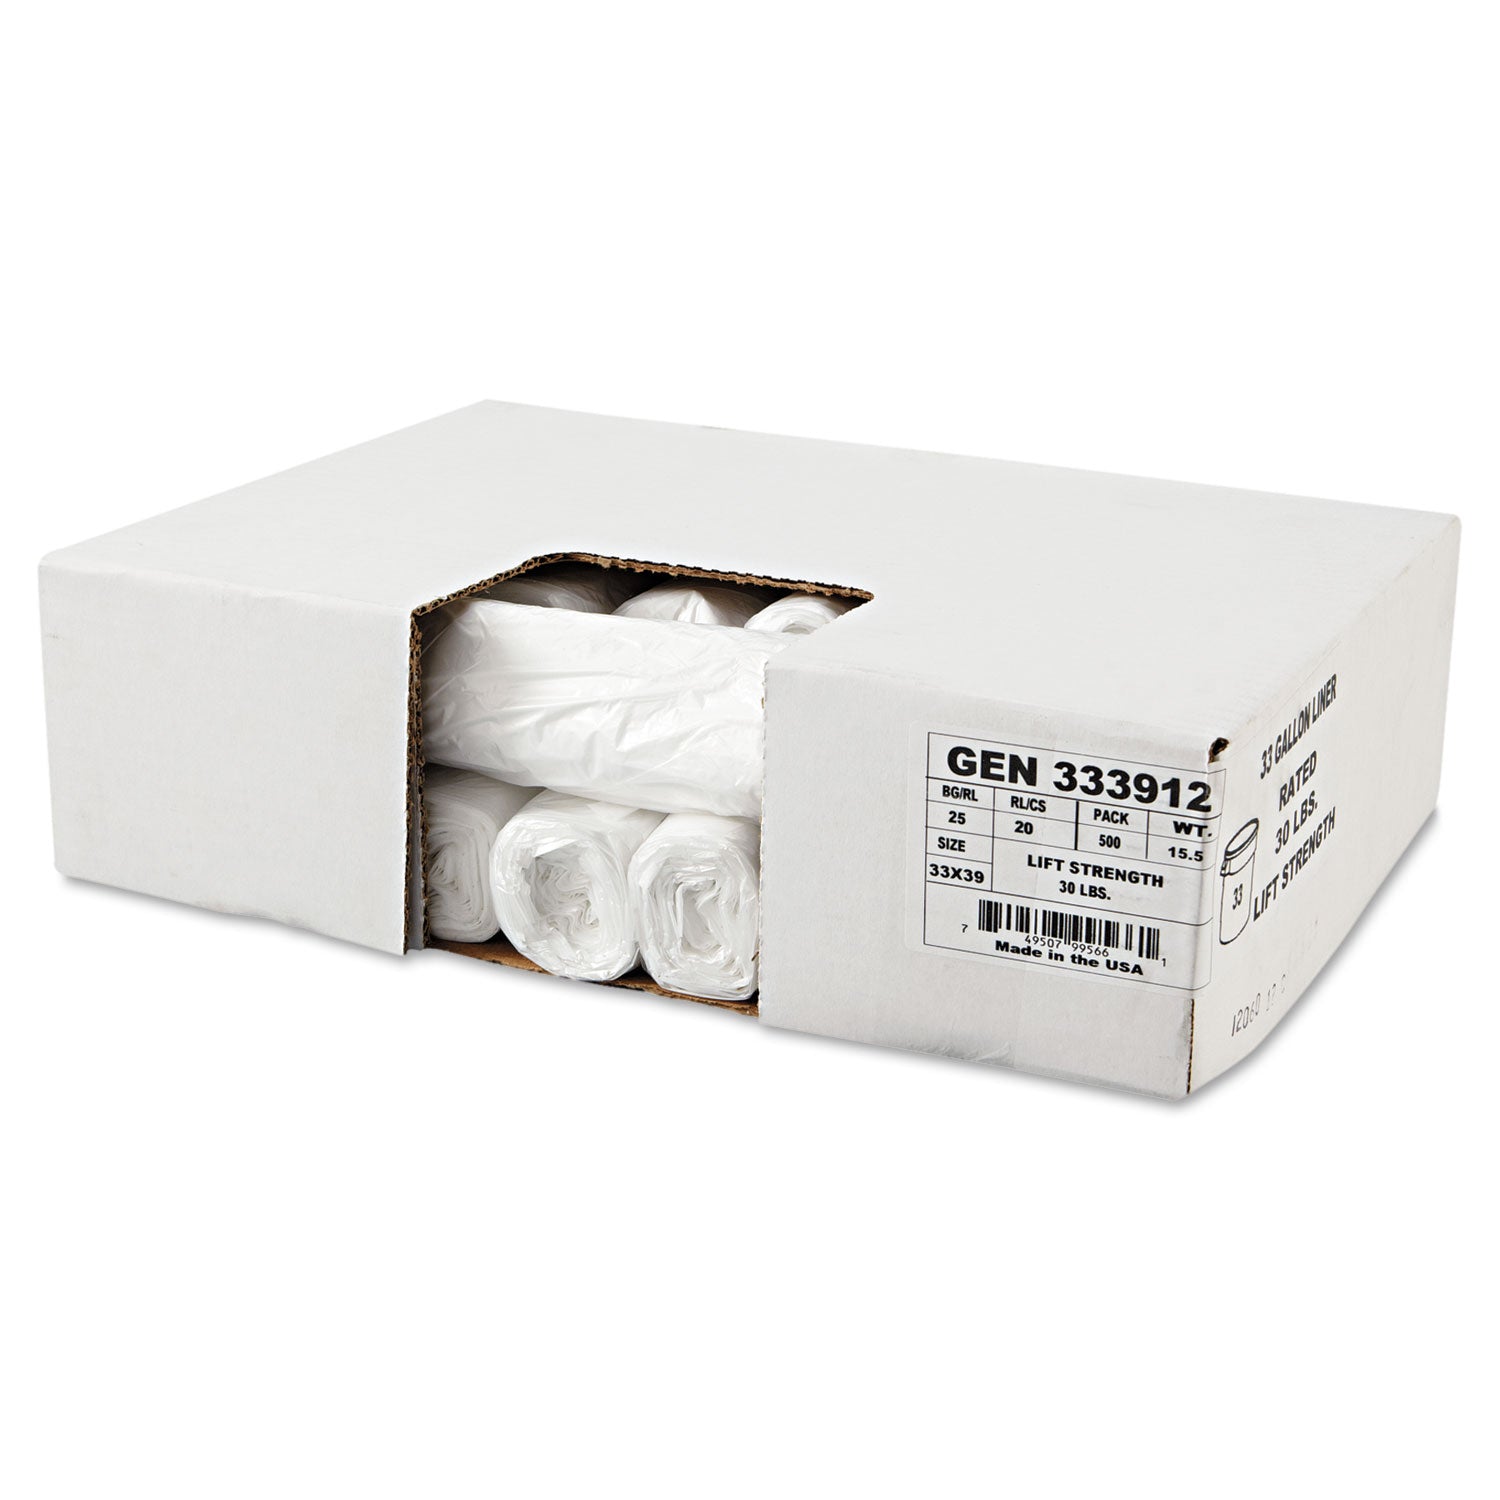 high-density-can-liners-33-gal-9-mic-33-x-39-natural-25-bags-roll-20-rolls-carton_bwk333912 - 2